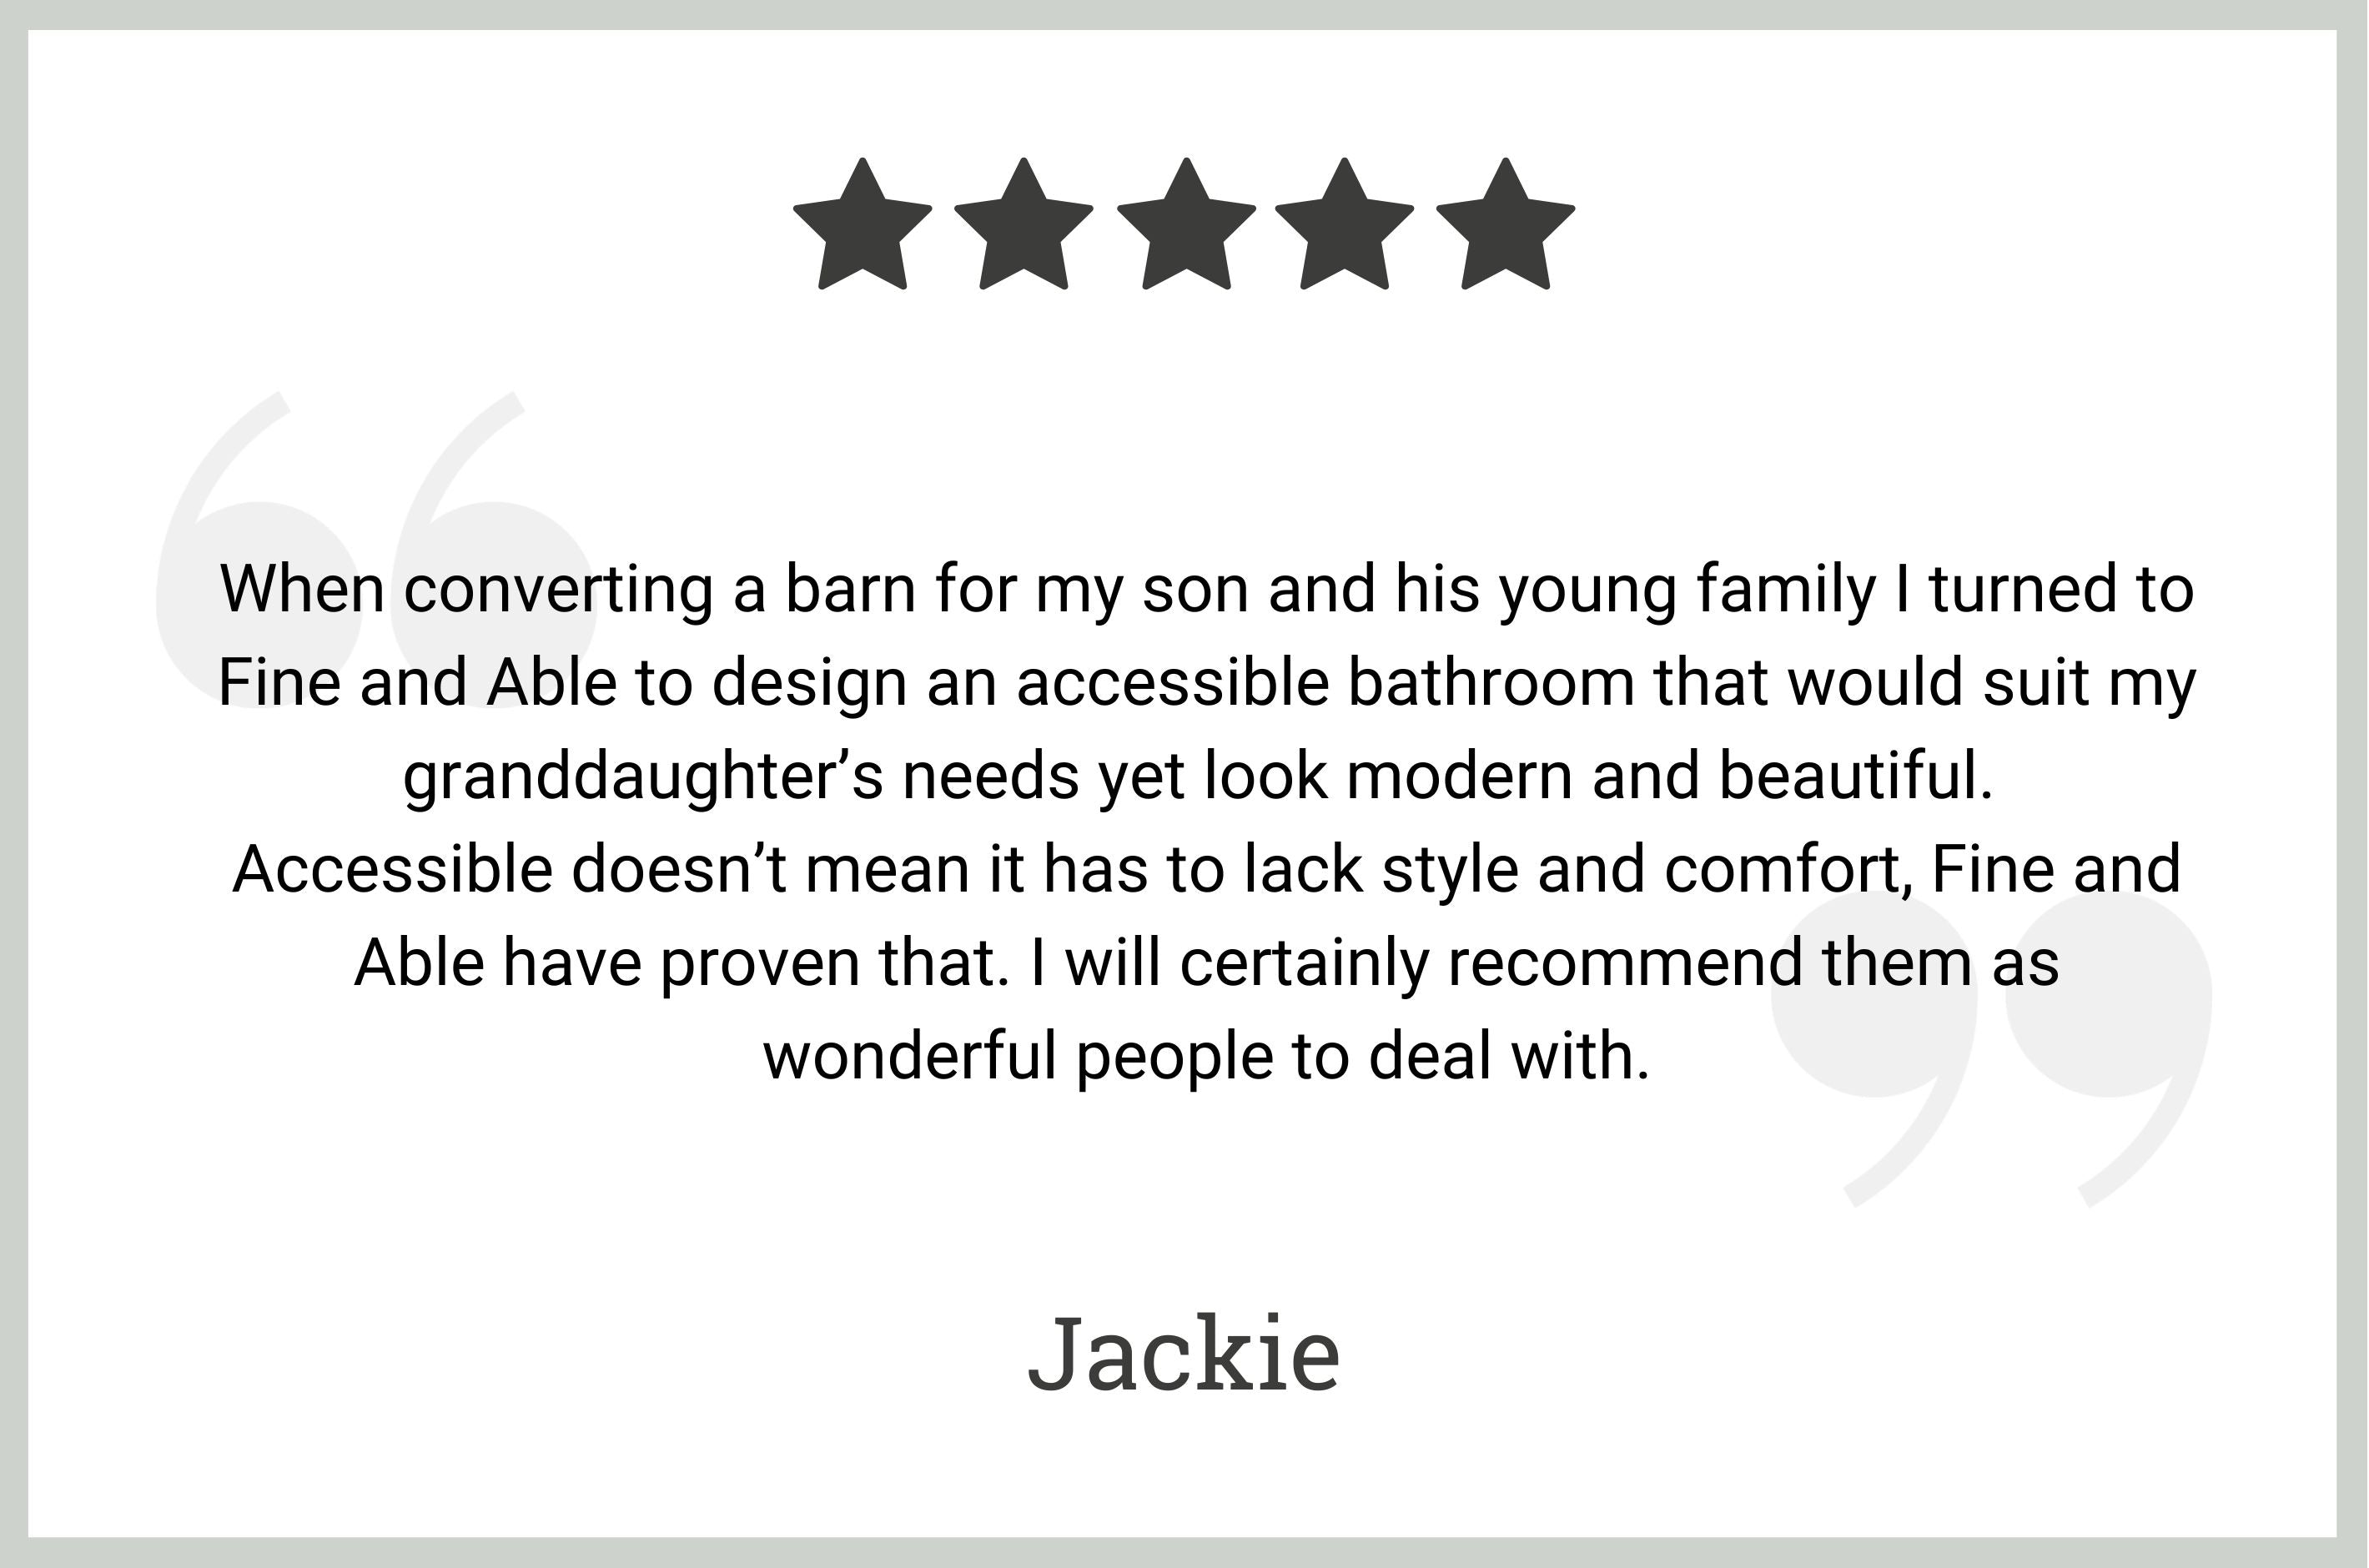 5 star review by Jackie